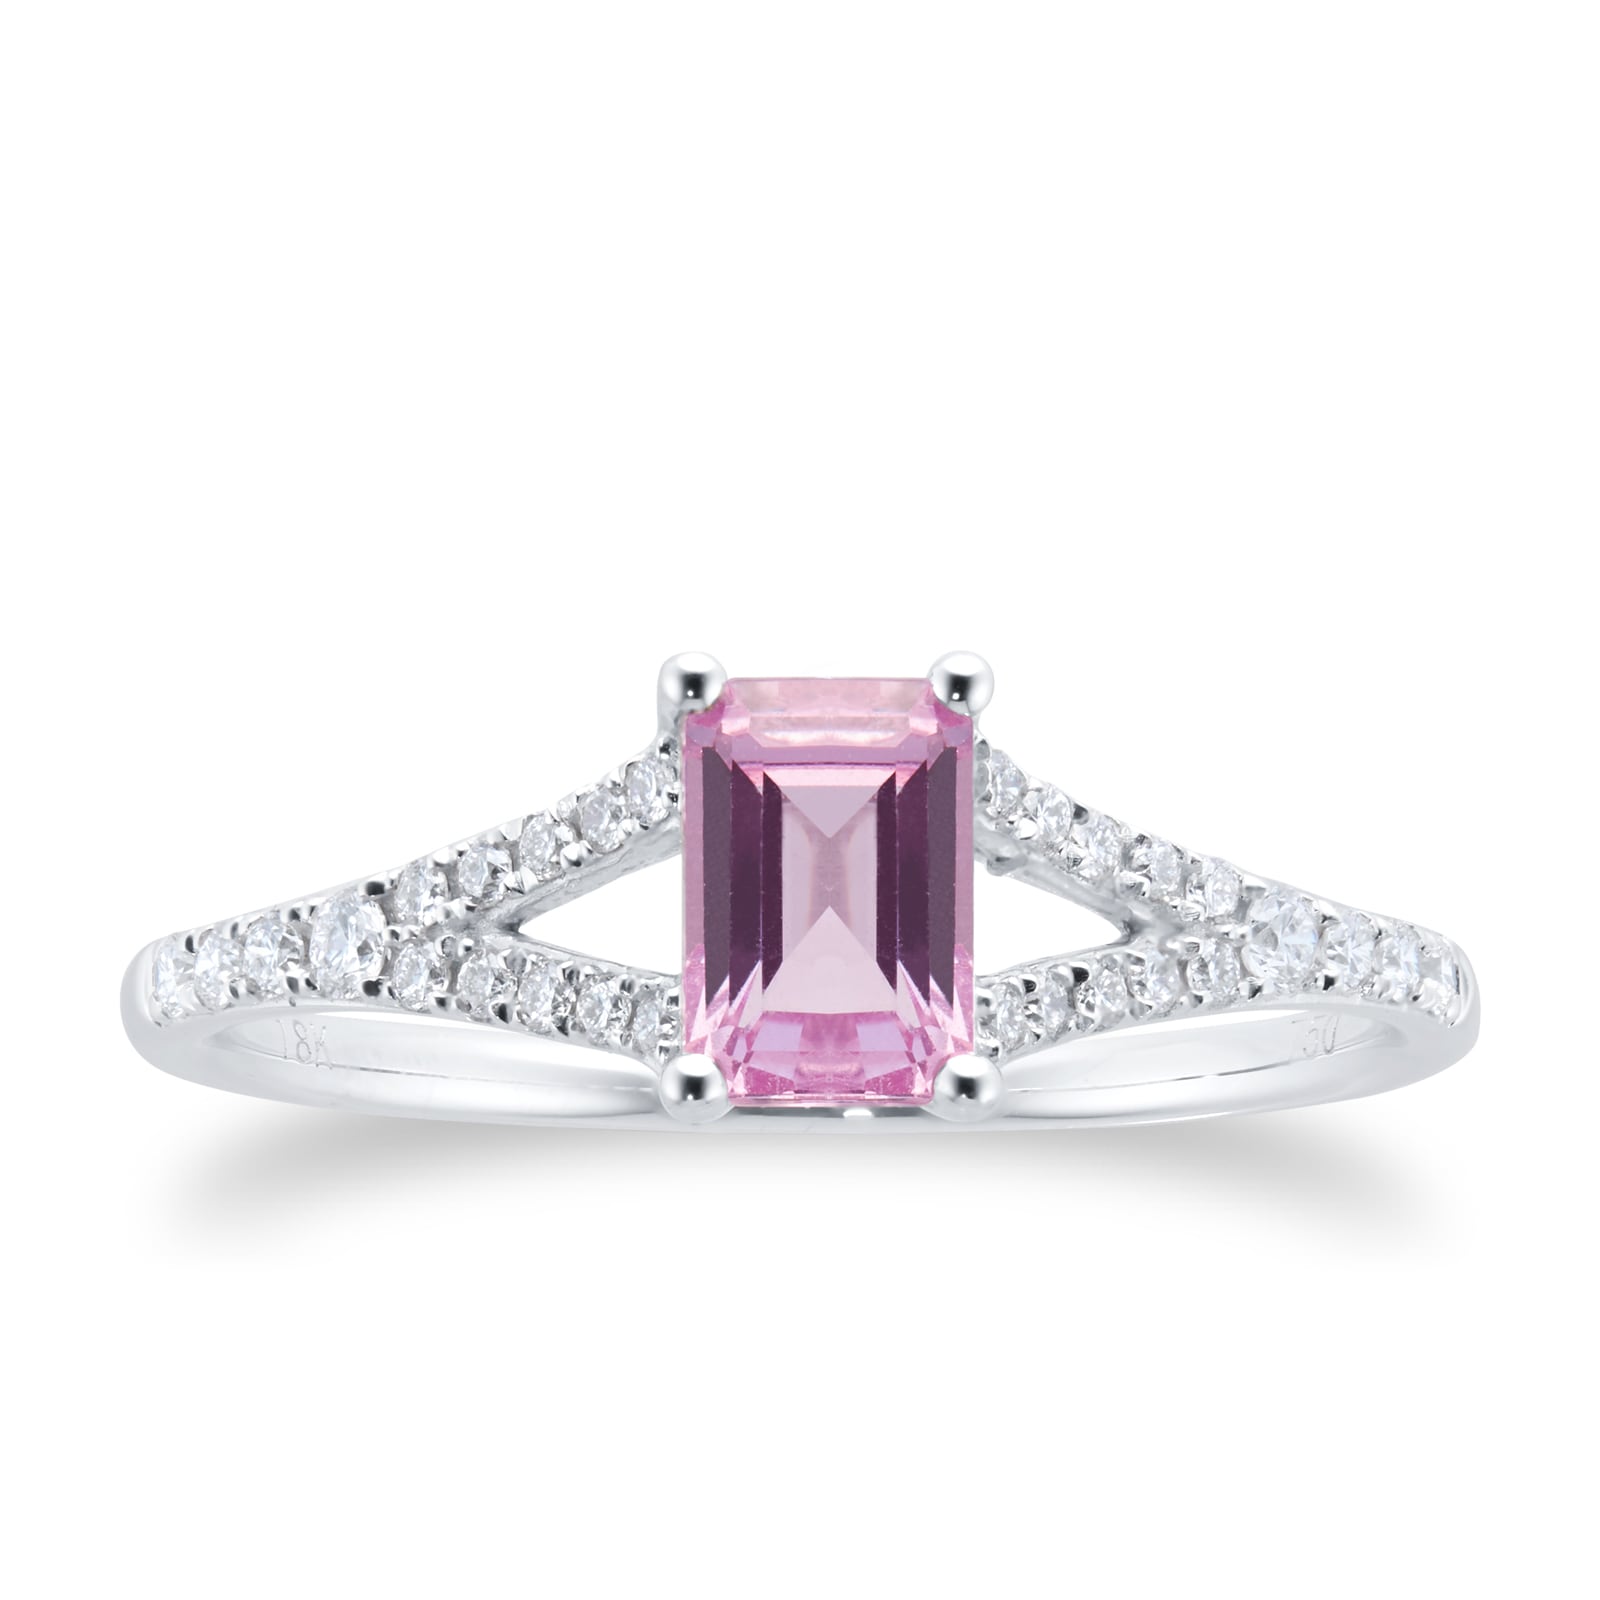 18ct White Gold 0.16cttw Diamond & Pink Sapphire Ring - Ring Size M